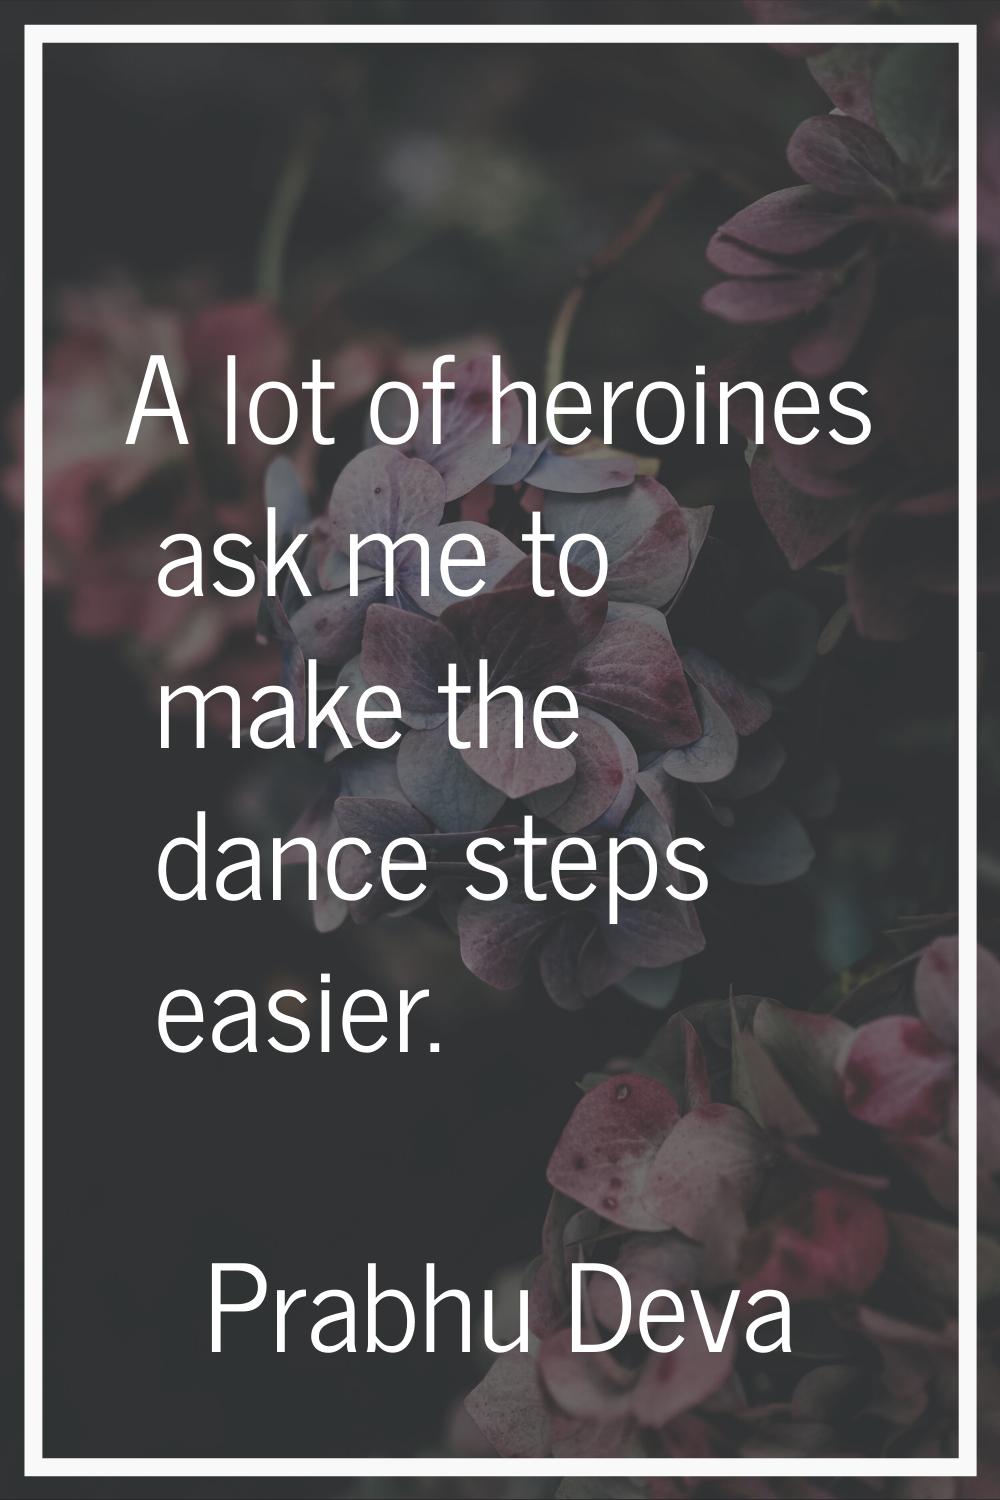 A lot of heroines ask me to make the dance steps easier.